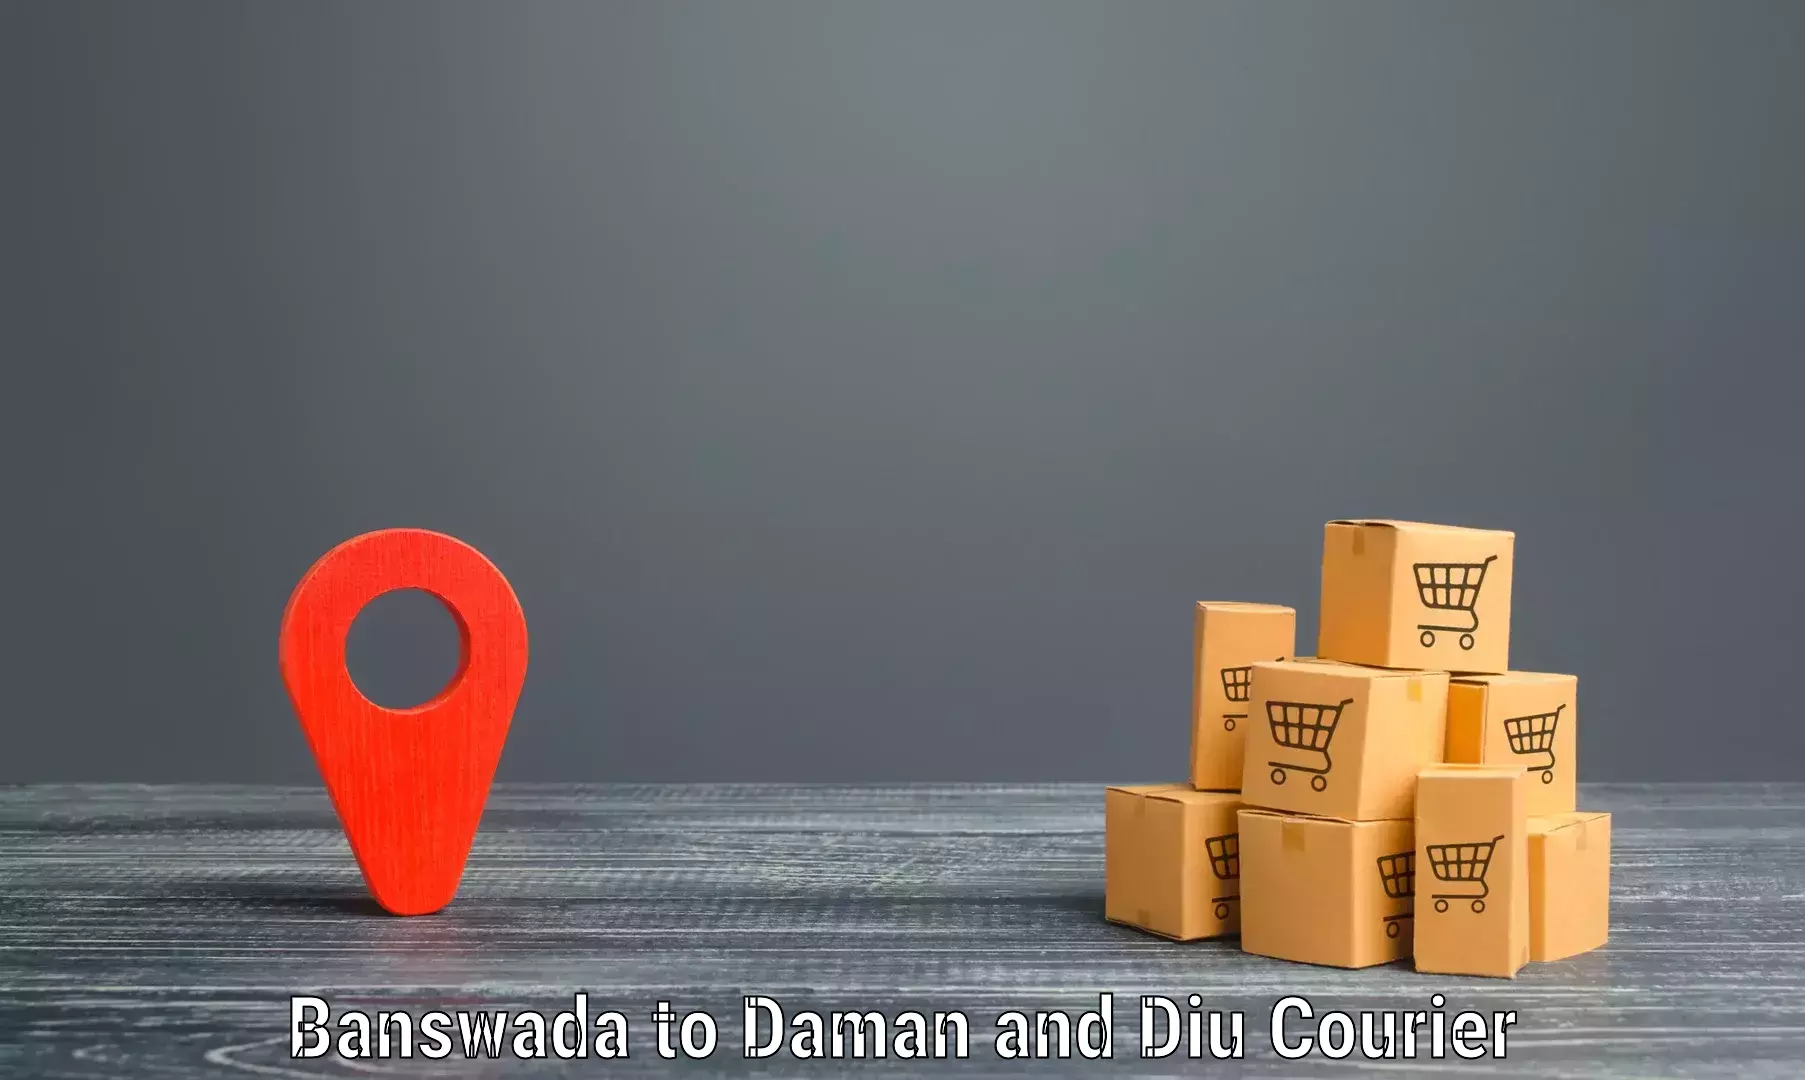 Courier service innovation in Banswada to Daman